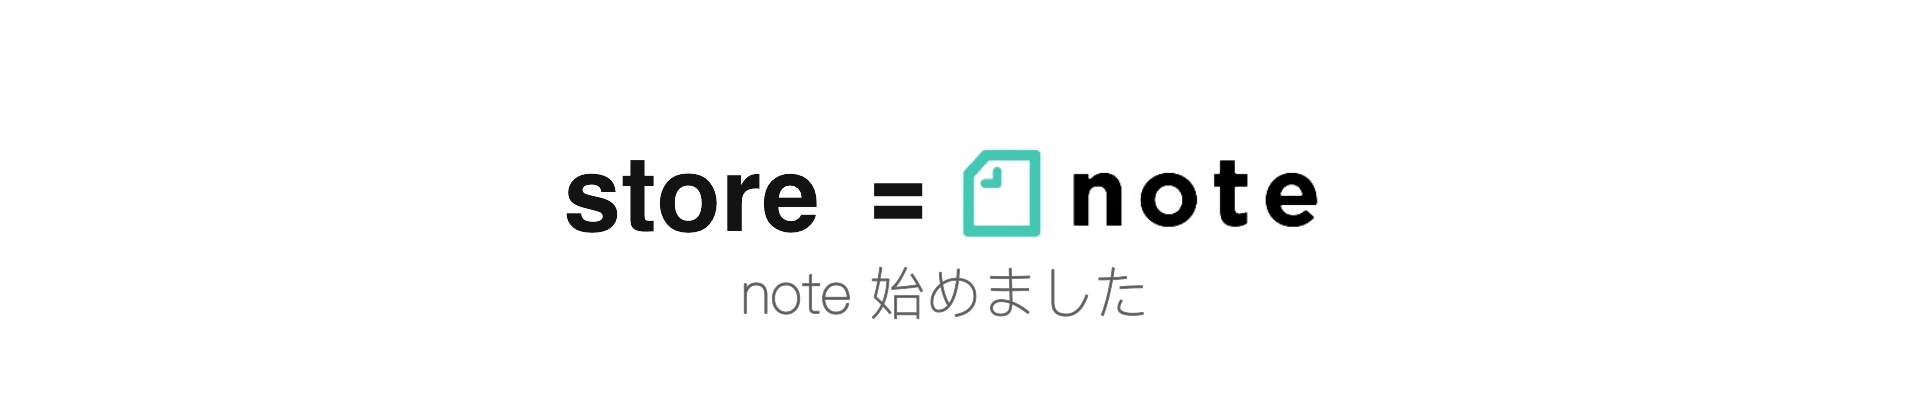 note = Store